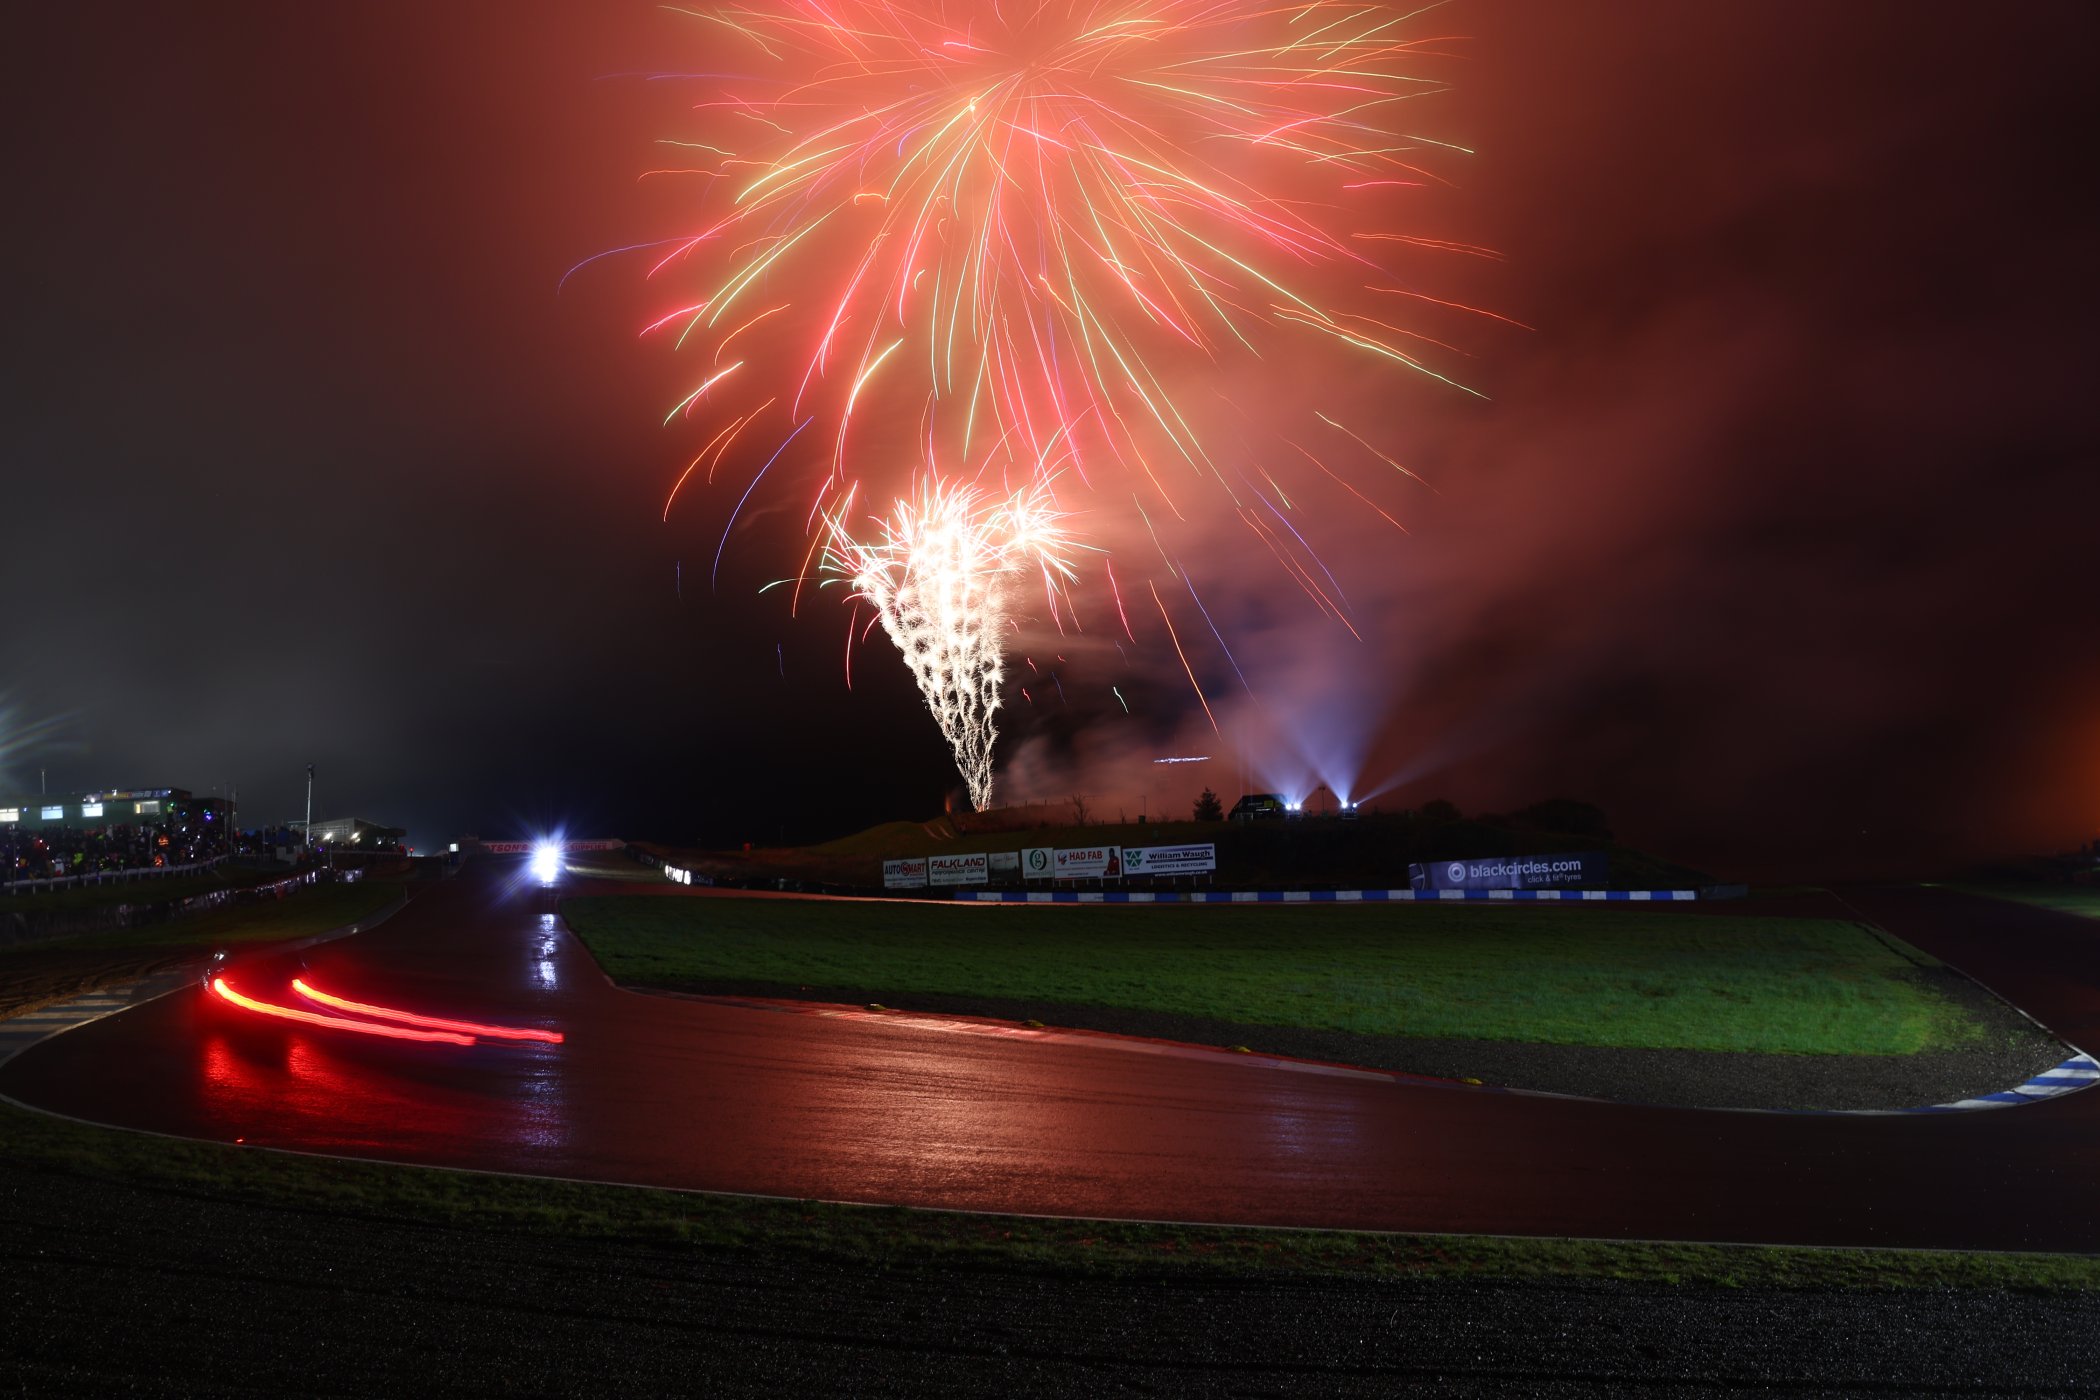 On Saturday 4th November, Knockhill will be hosting its annual Bonfire and Fireworks spectacular, one of the biggest shows in the UK! The Live-Action and Fireworks event will start at 2.00pm (gates open at 1.00pm) and will see a multitude of action on and off track, centred around Knockhill’s famous tri-oval section of the track, at the Hairpin. Tickets will sell out, as they have for the last three years, and there are no tickets available to purchase at the gate.